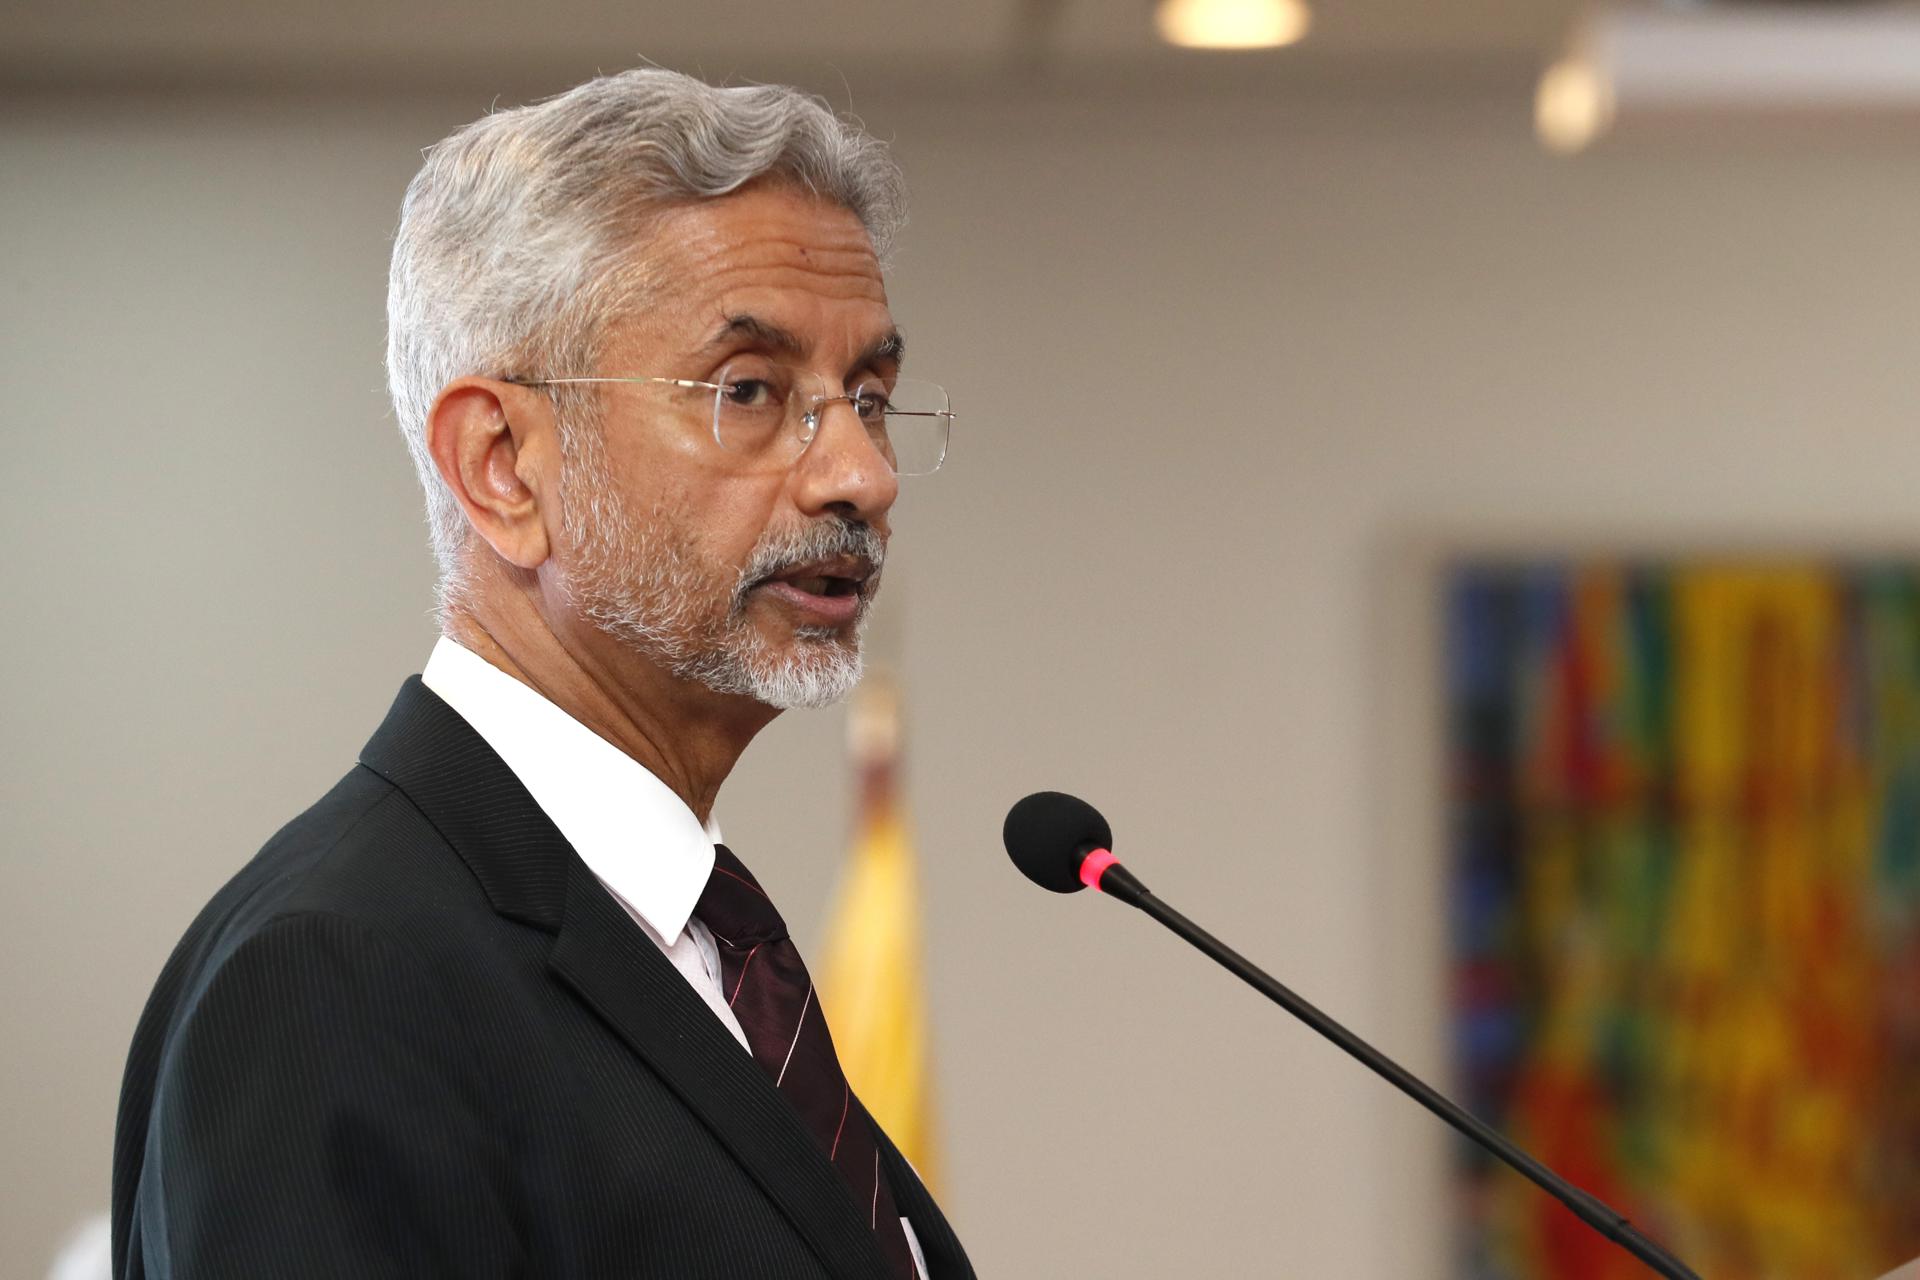 India's foreign minister, Dr. S. Jaishankar, speaks at the India-Colombia Business Forum in Bogota on 27 April 2023. EFE/Carlos Ortega
